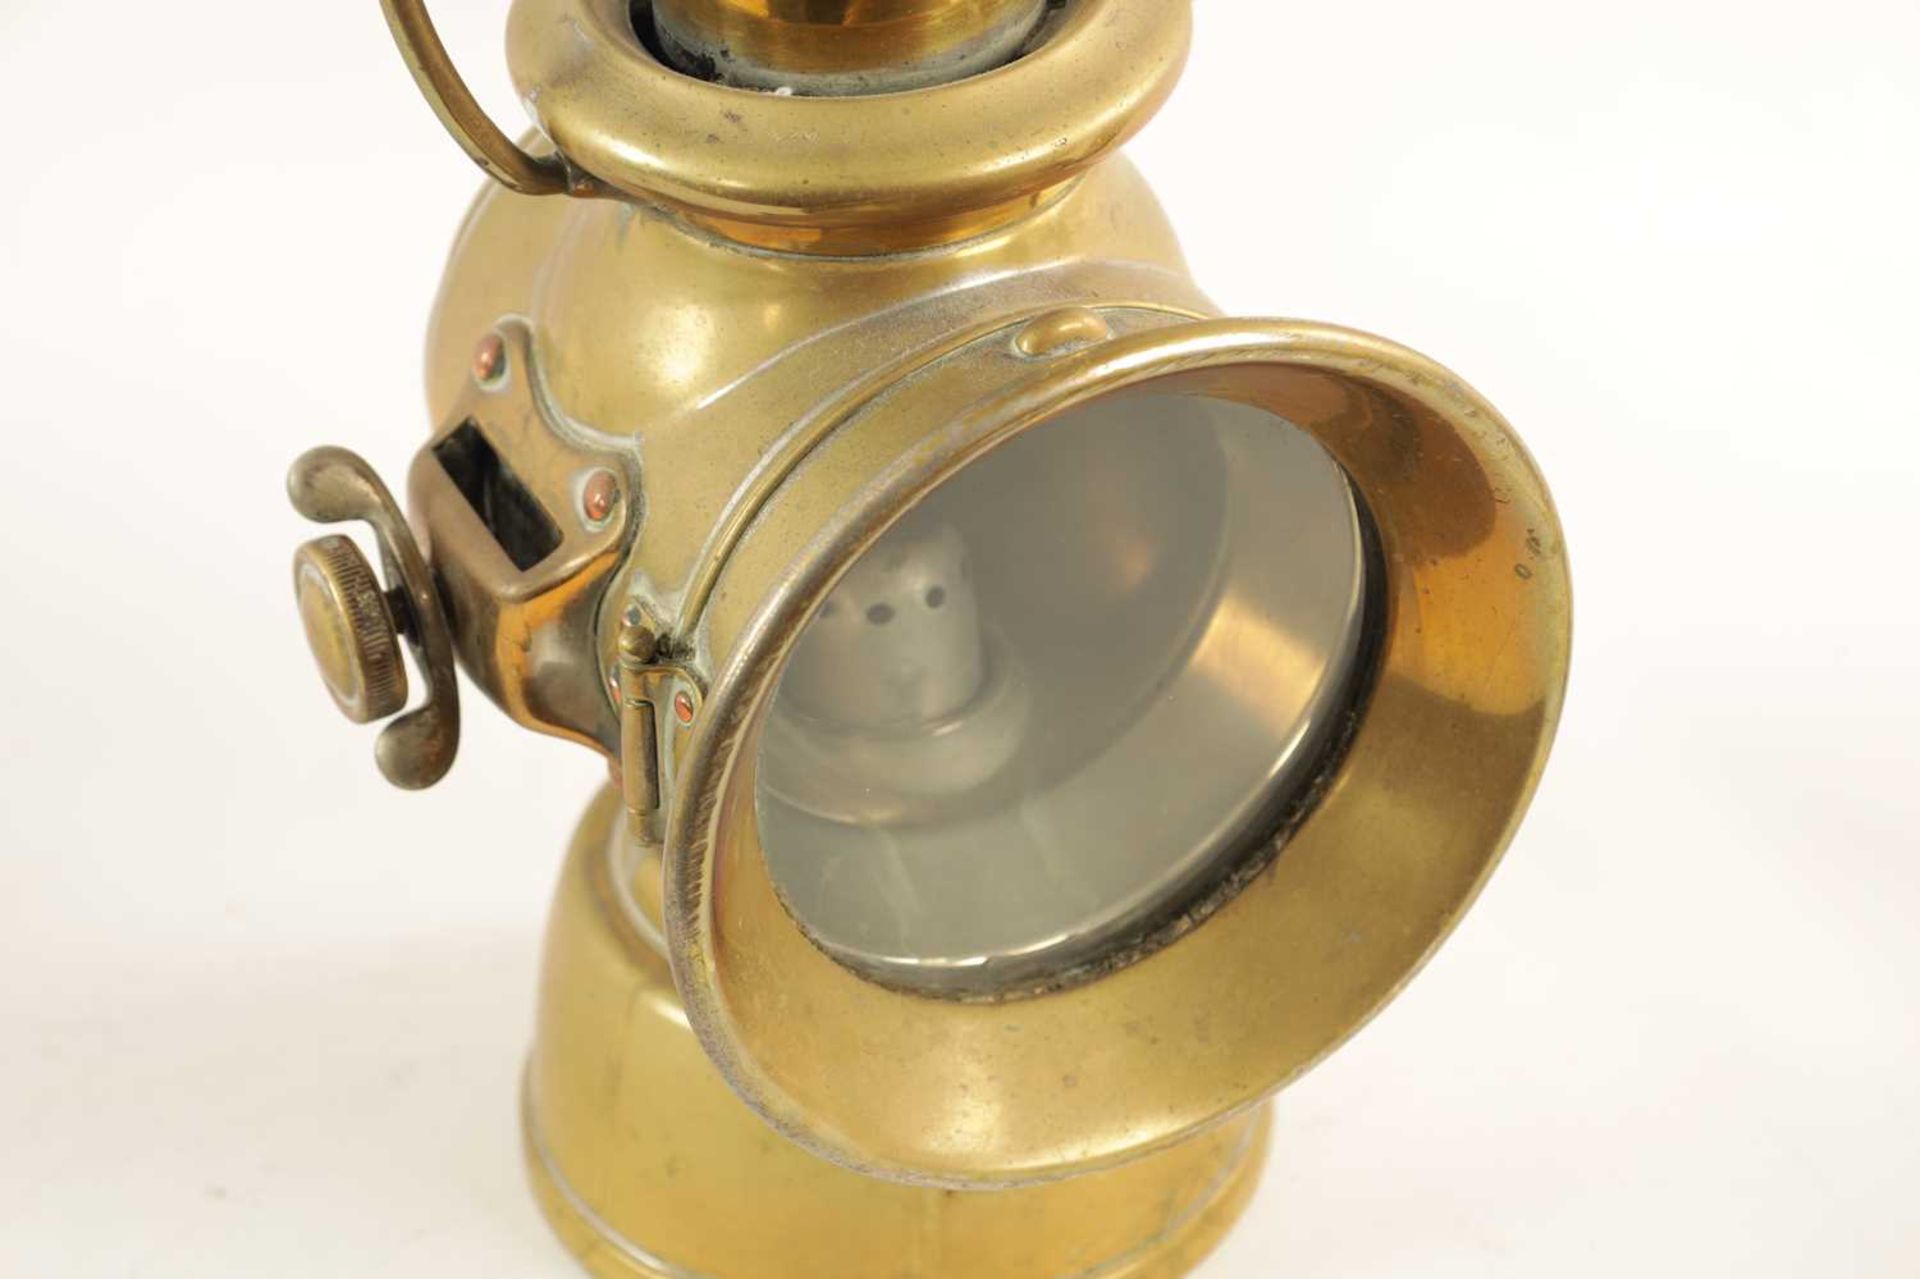 A BRASS LUCAS 721 'KING OF THE ROAD' OIL SIDE LAMP - Image 4 of 9